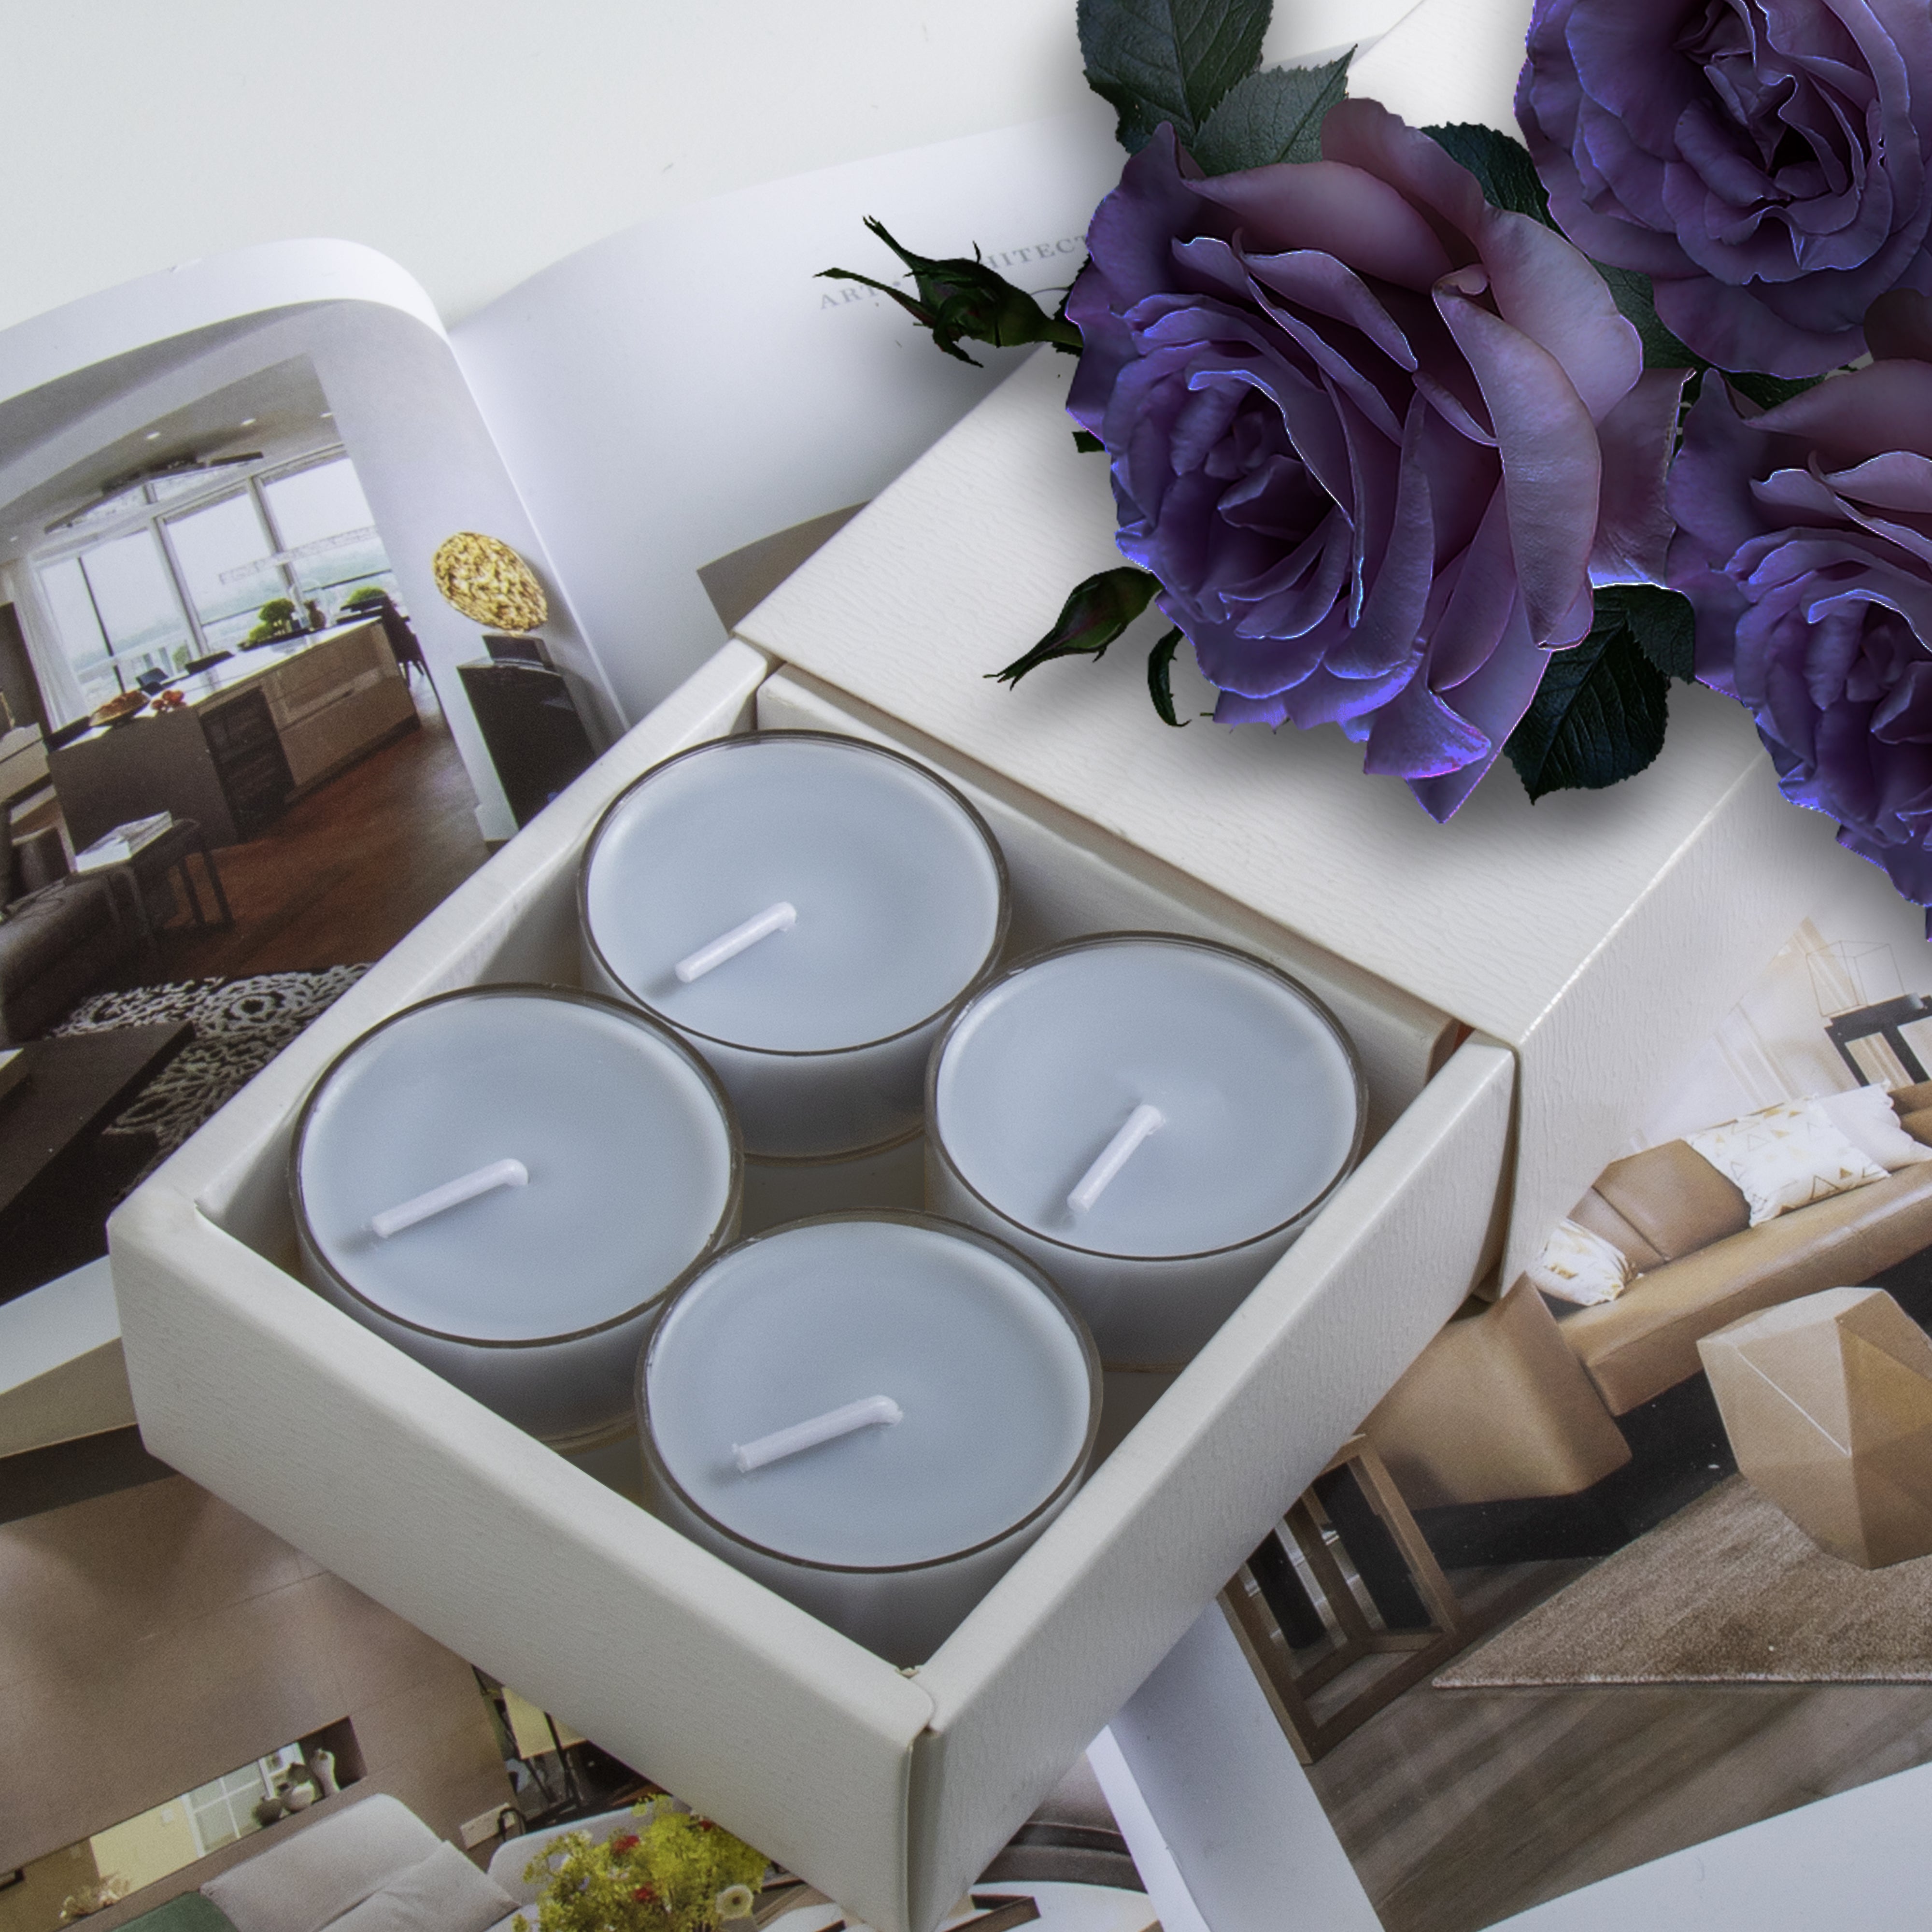 Velvet Scented Tealight Candles - VAUCLUSE